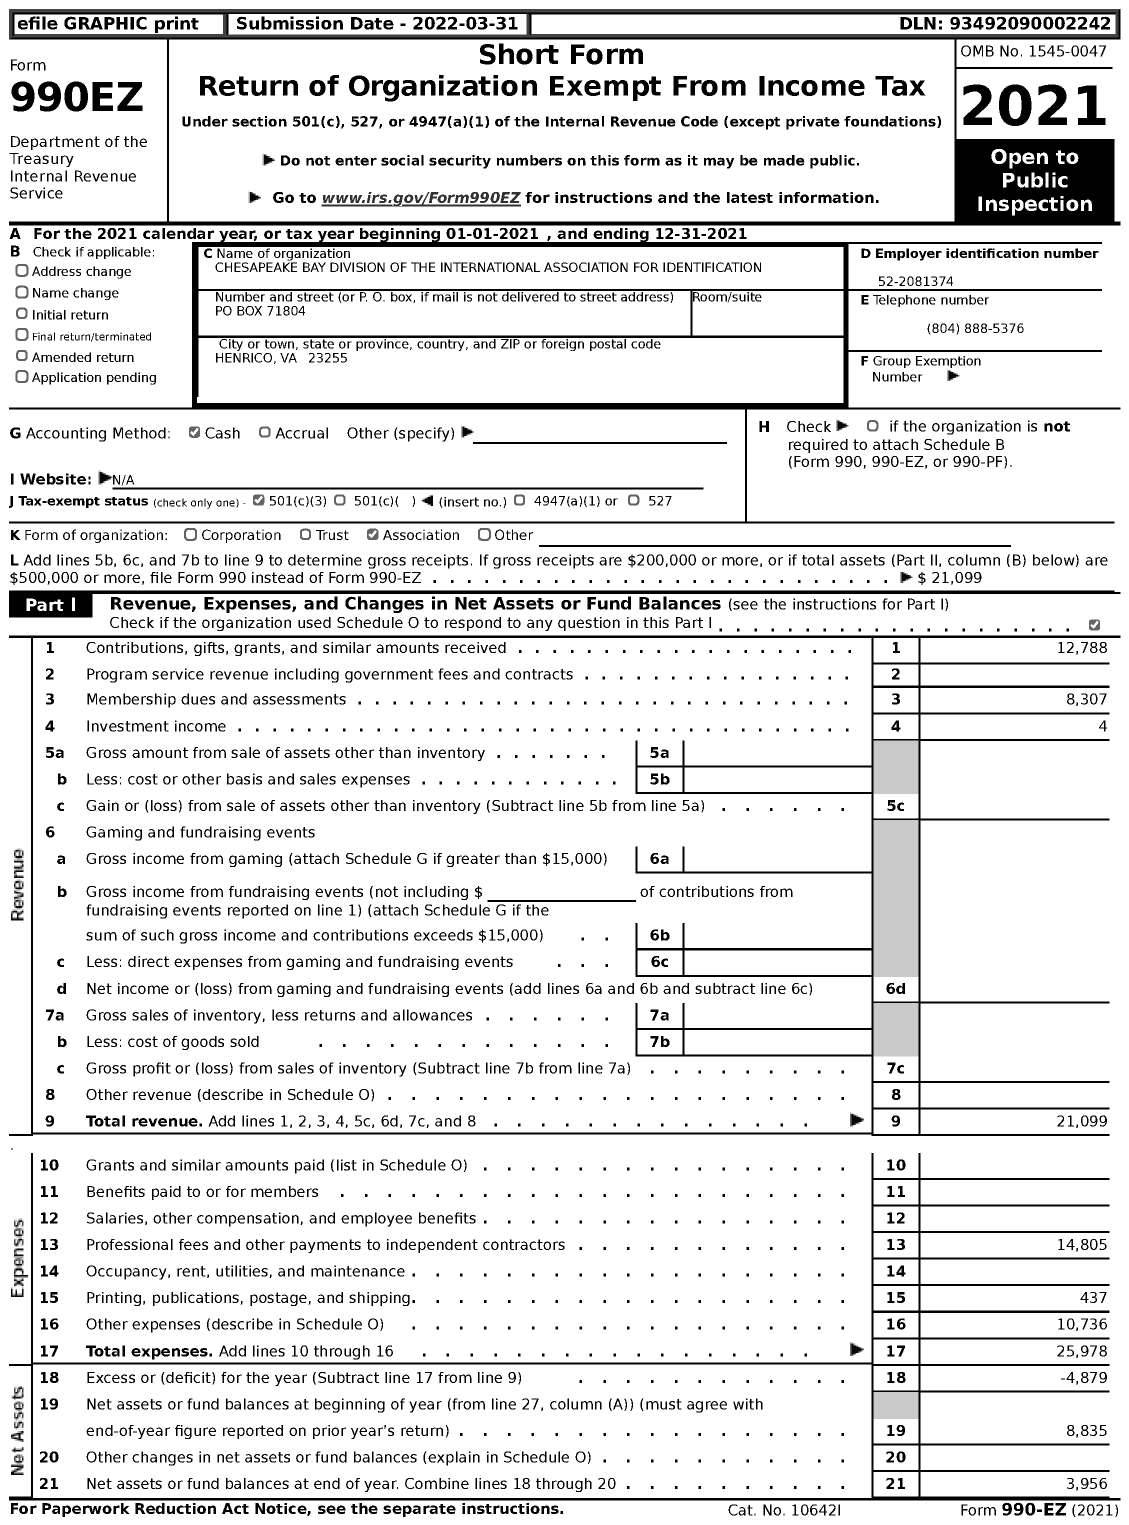 Image of first page of 2021 Form 990EZ for Chesapeake Bay Division of the International Association for Identification